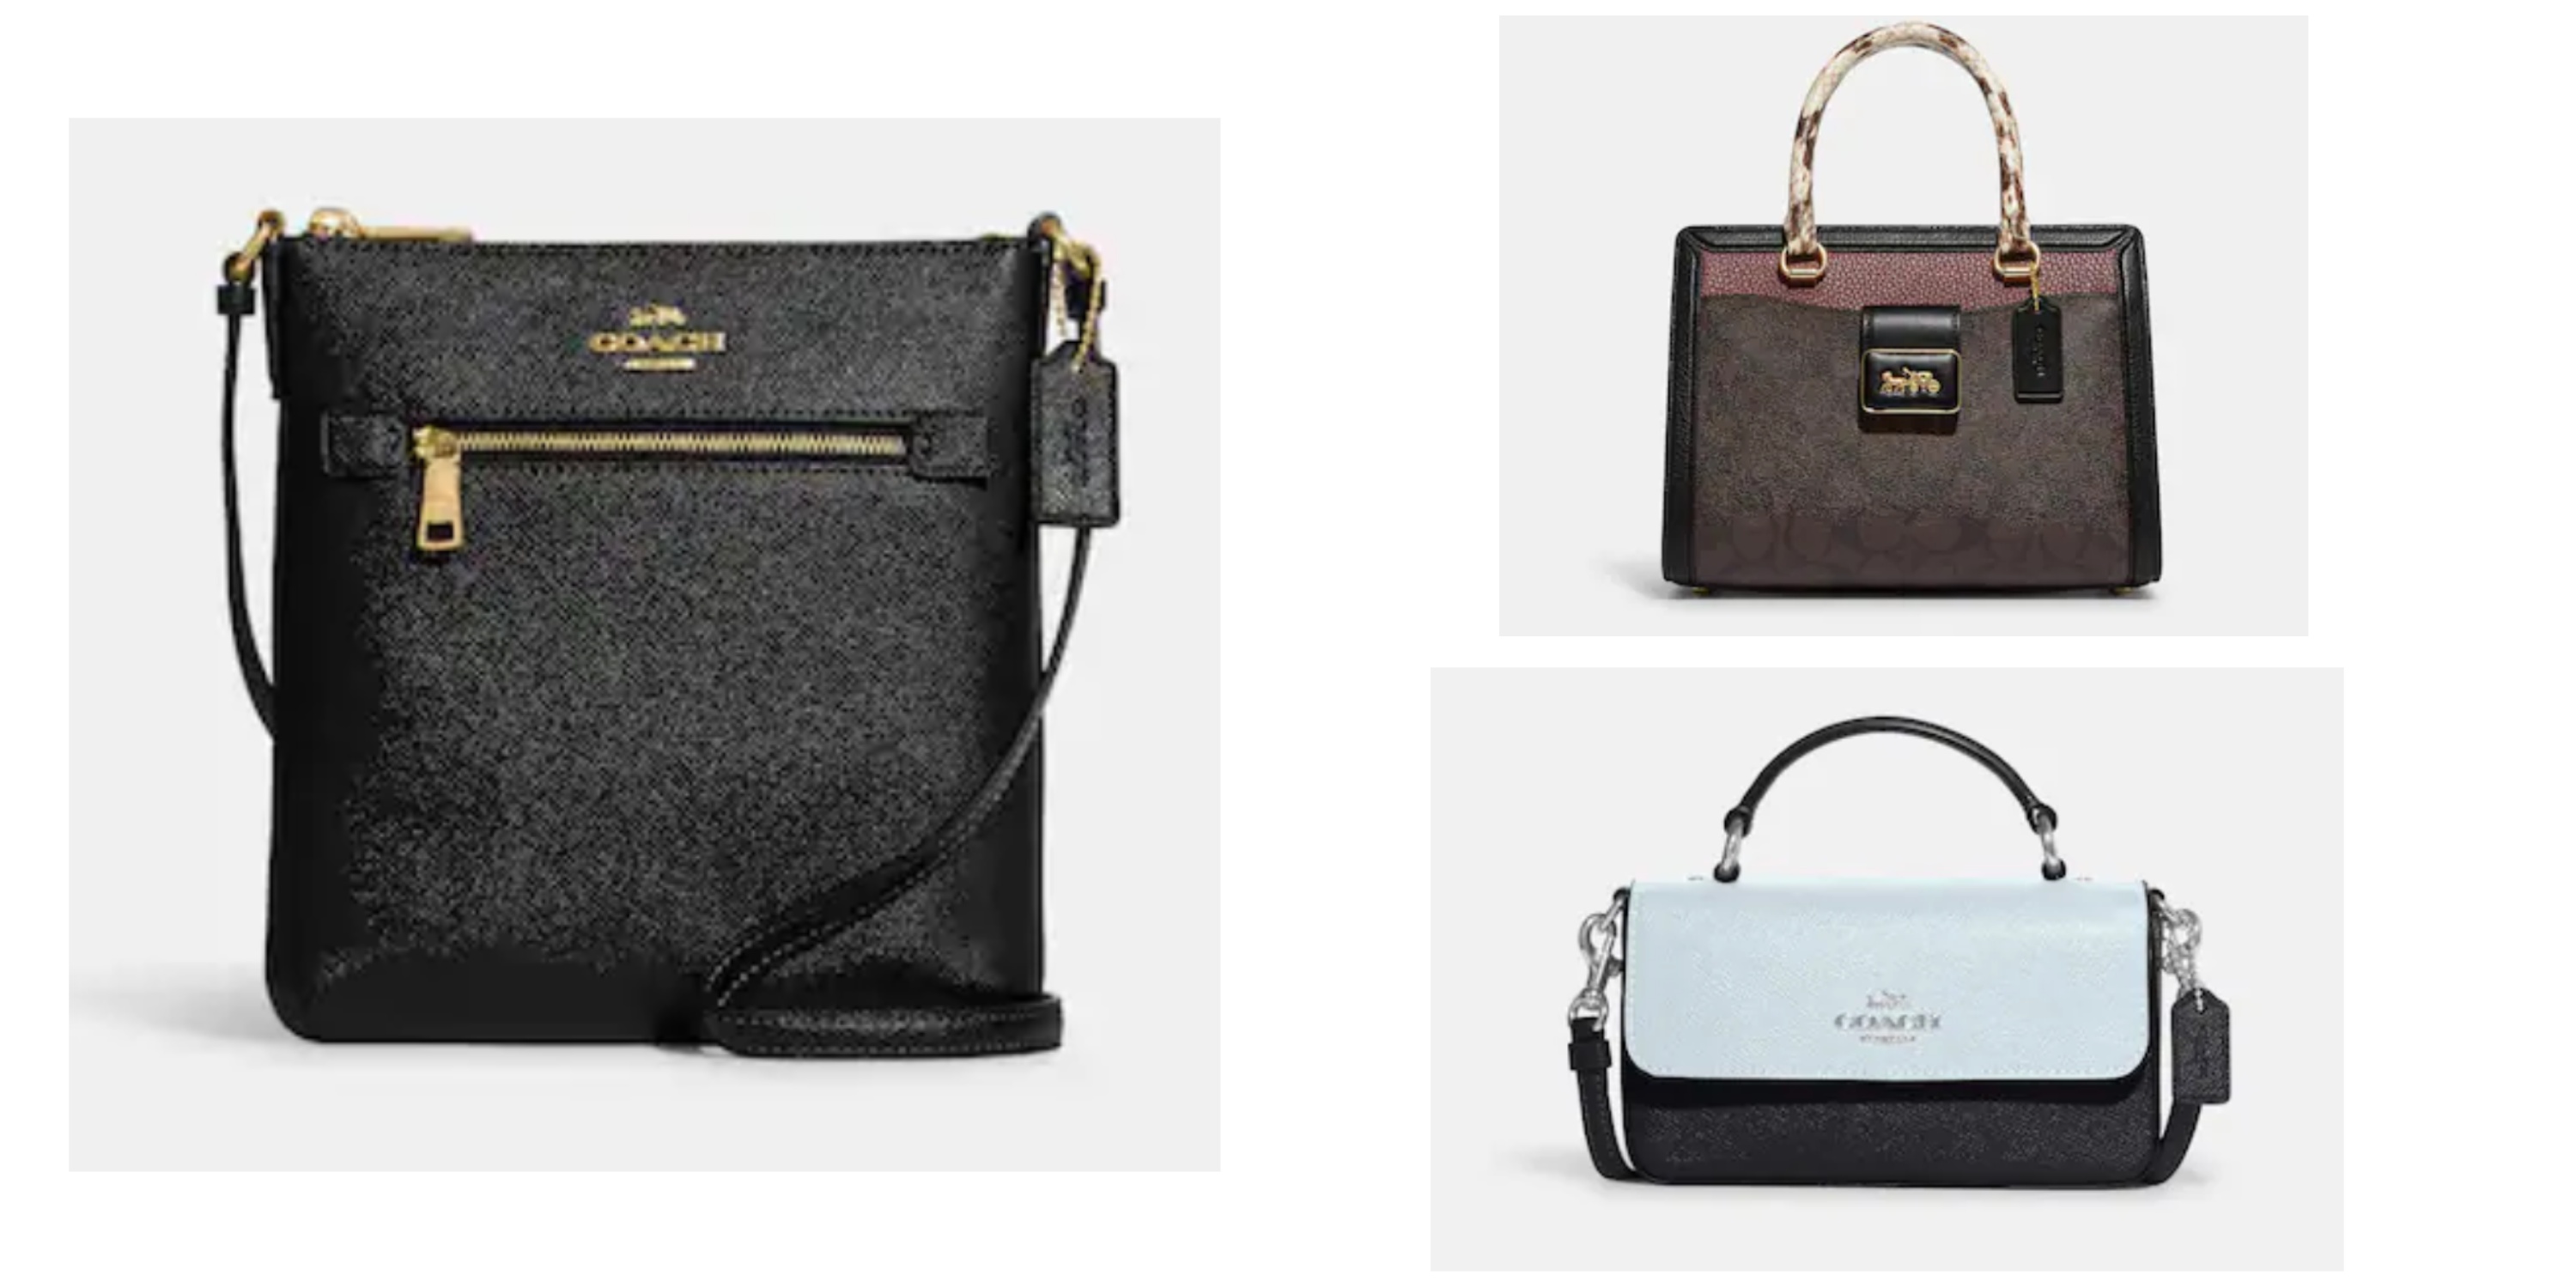 Coach Outlet clearance sale: Save 75% on a wide selection of bags and more